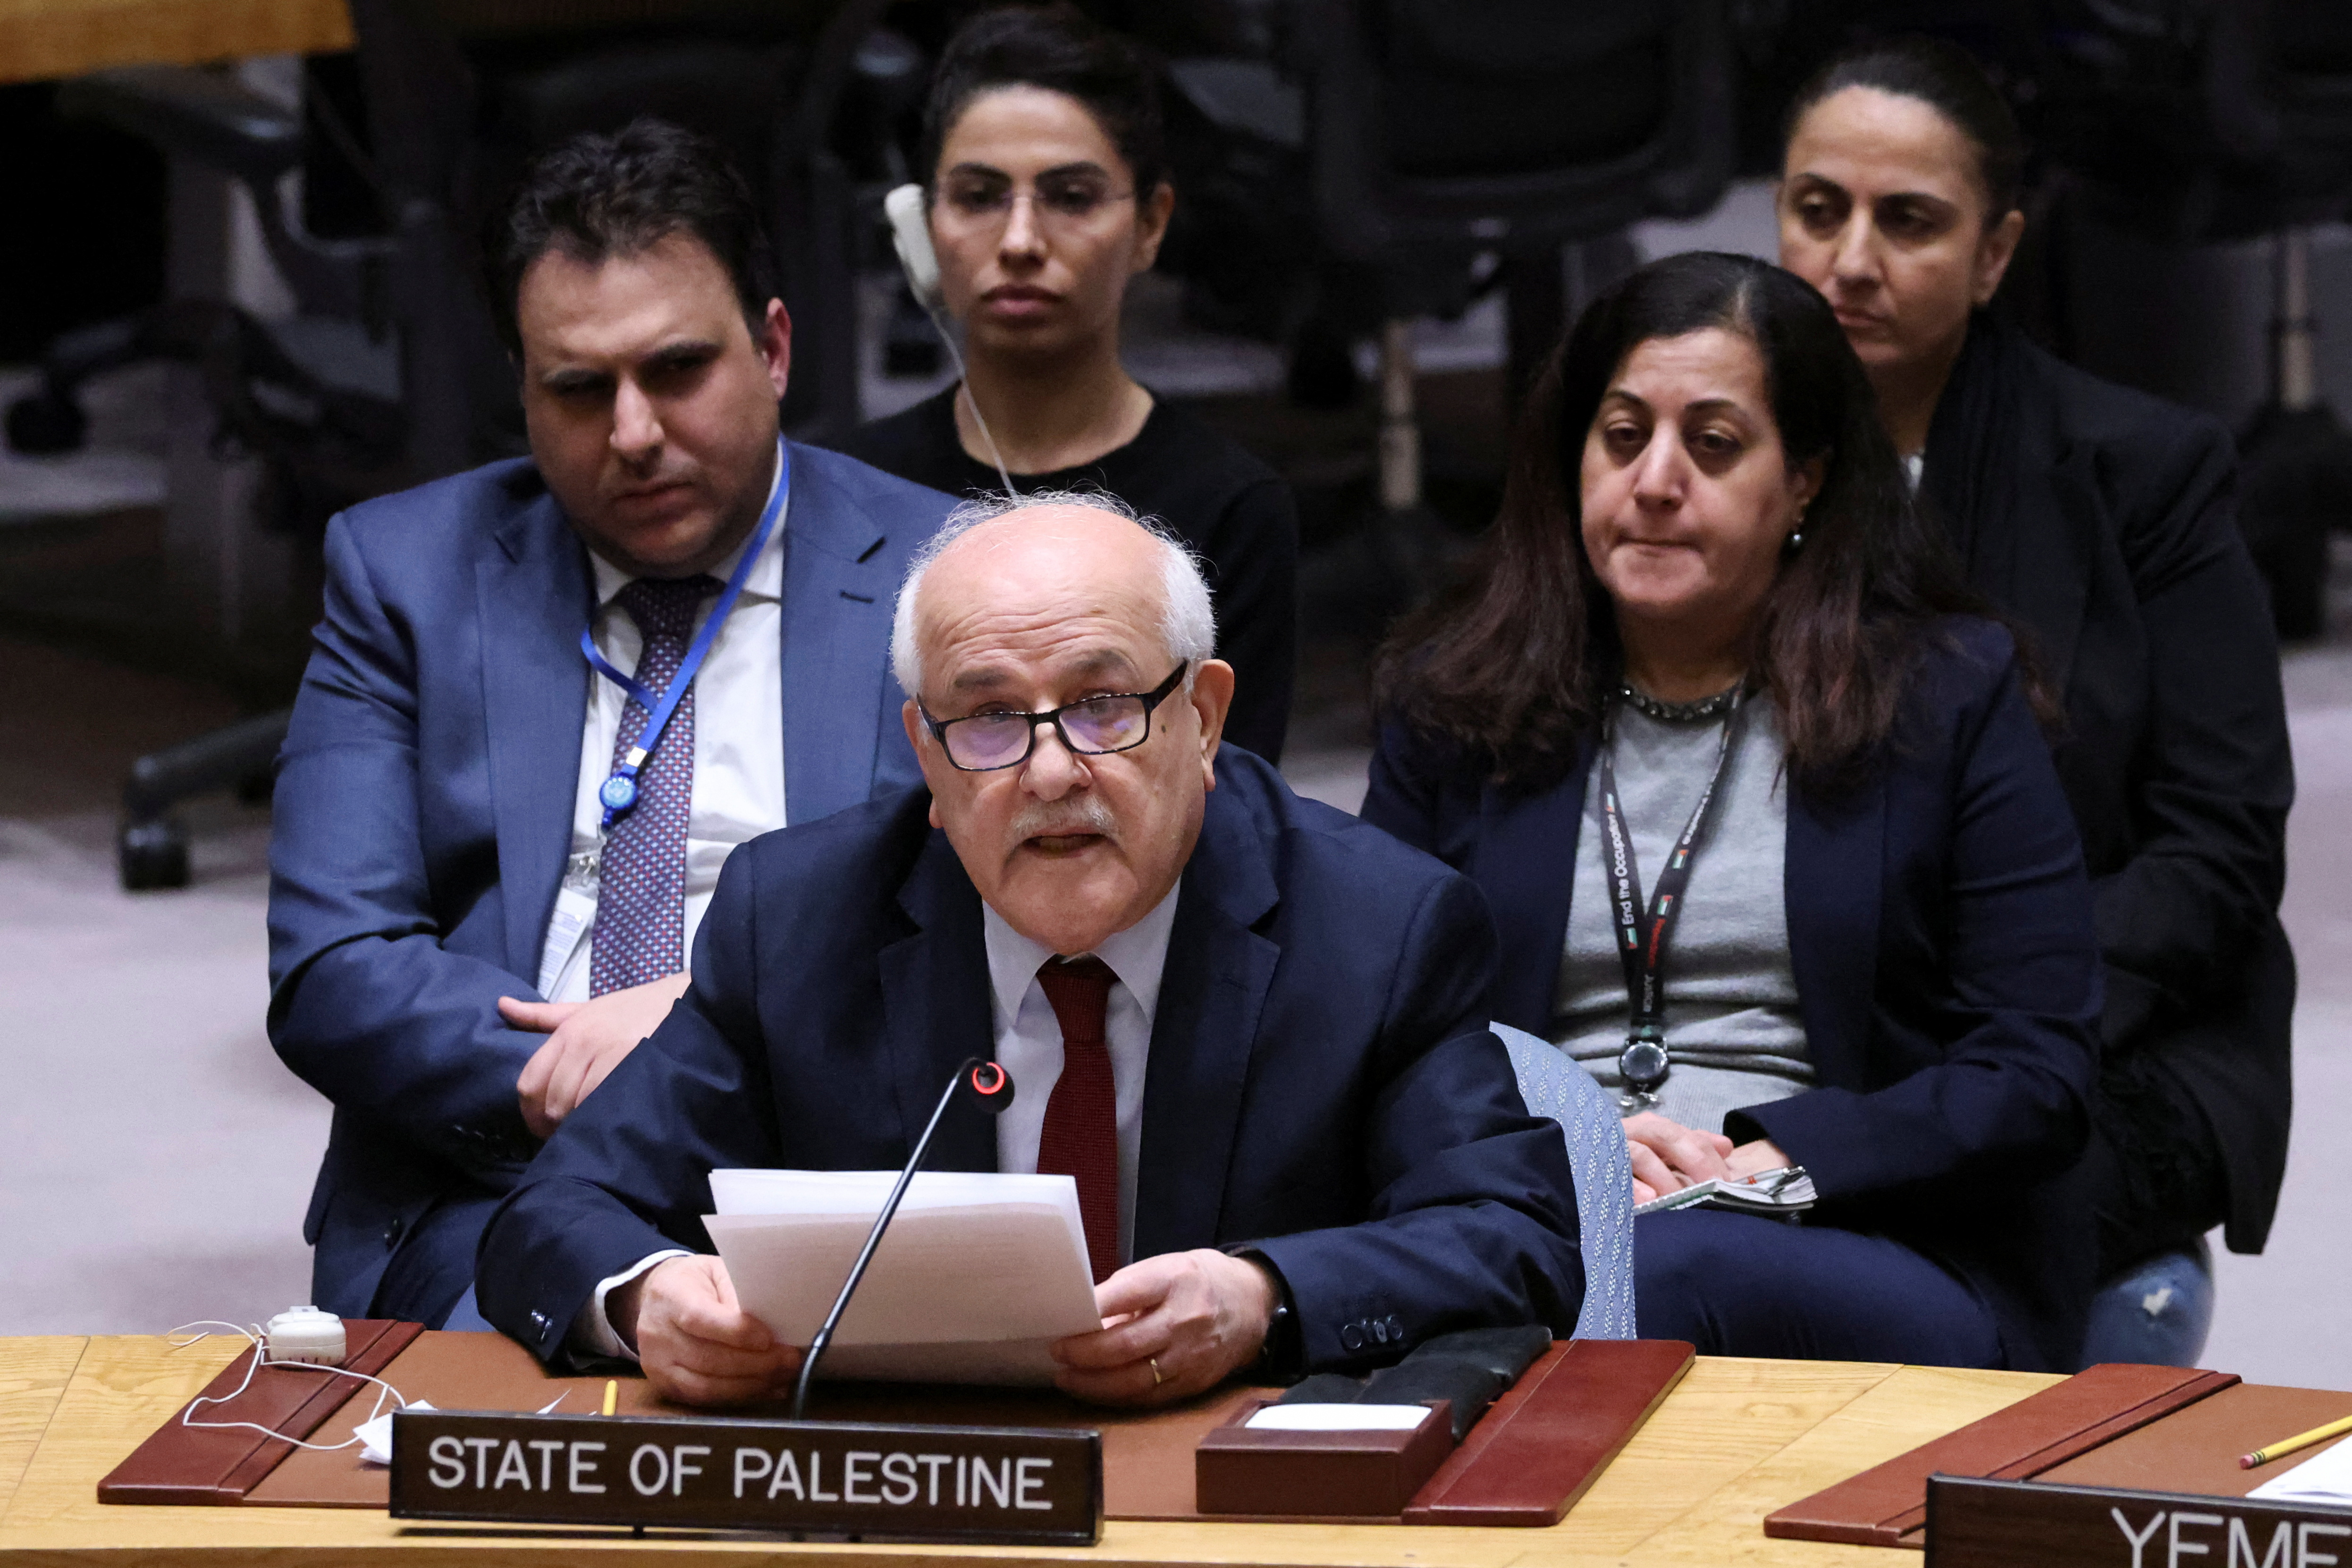 Members of the United Nations Security Council vote on a Gaza resolution that demands an immediate ceasefire, in New York